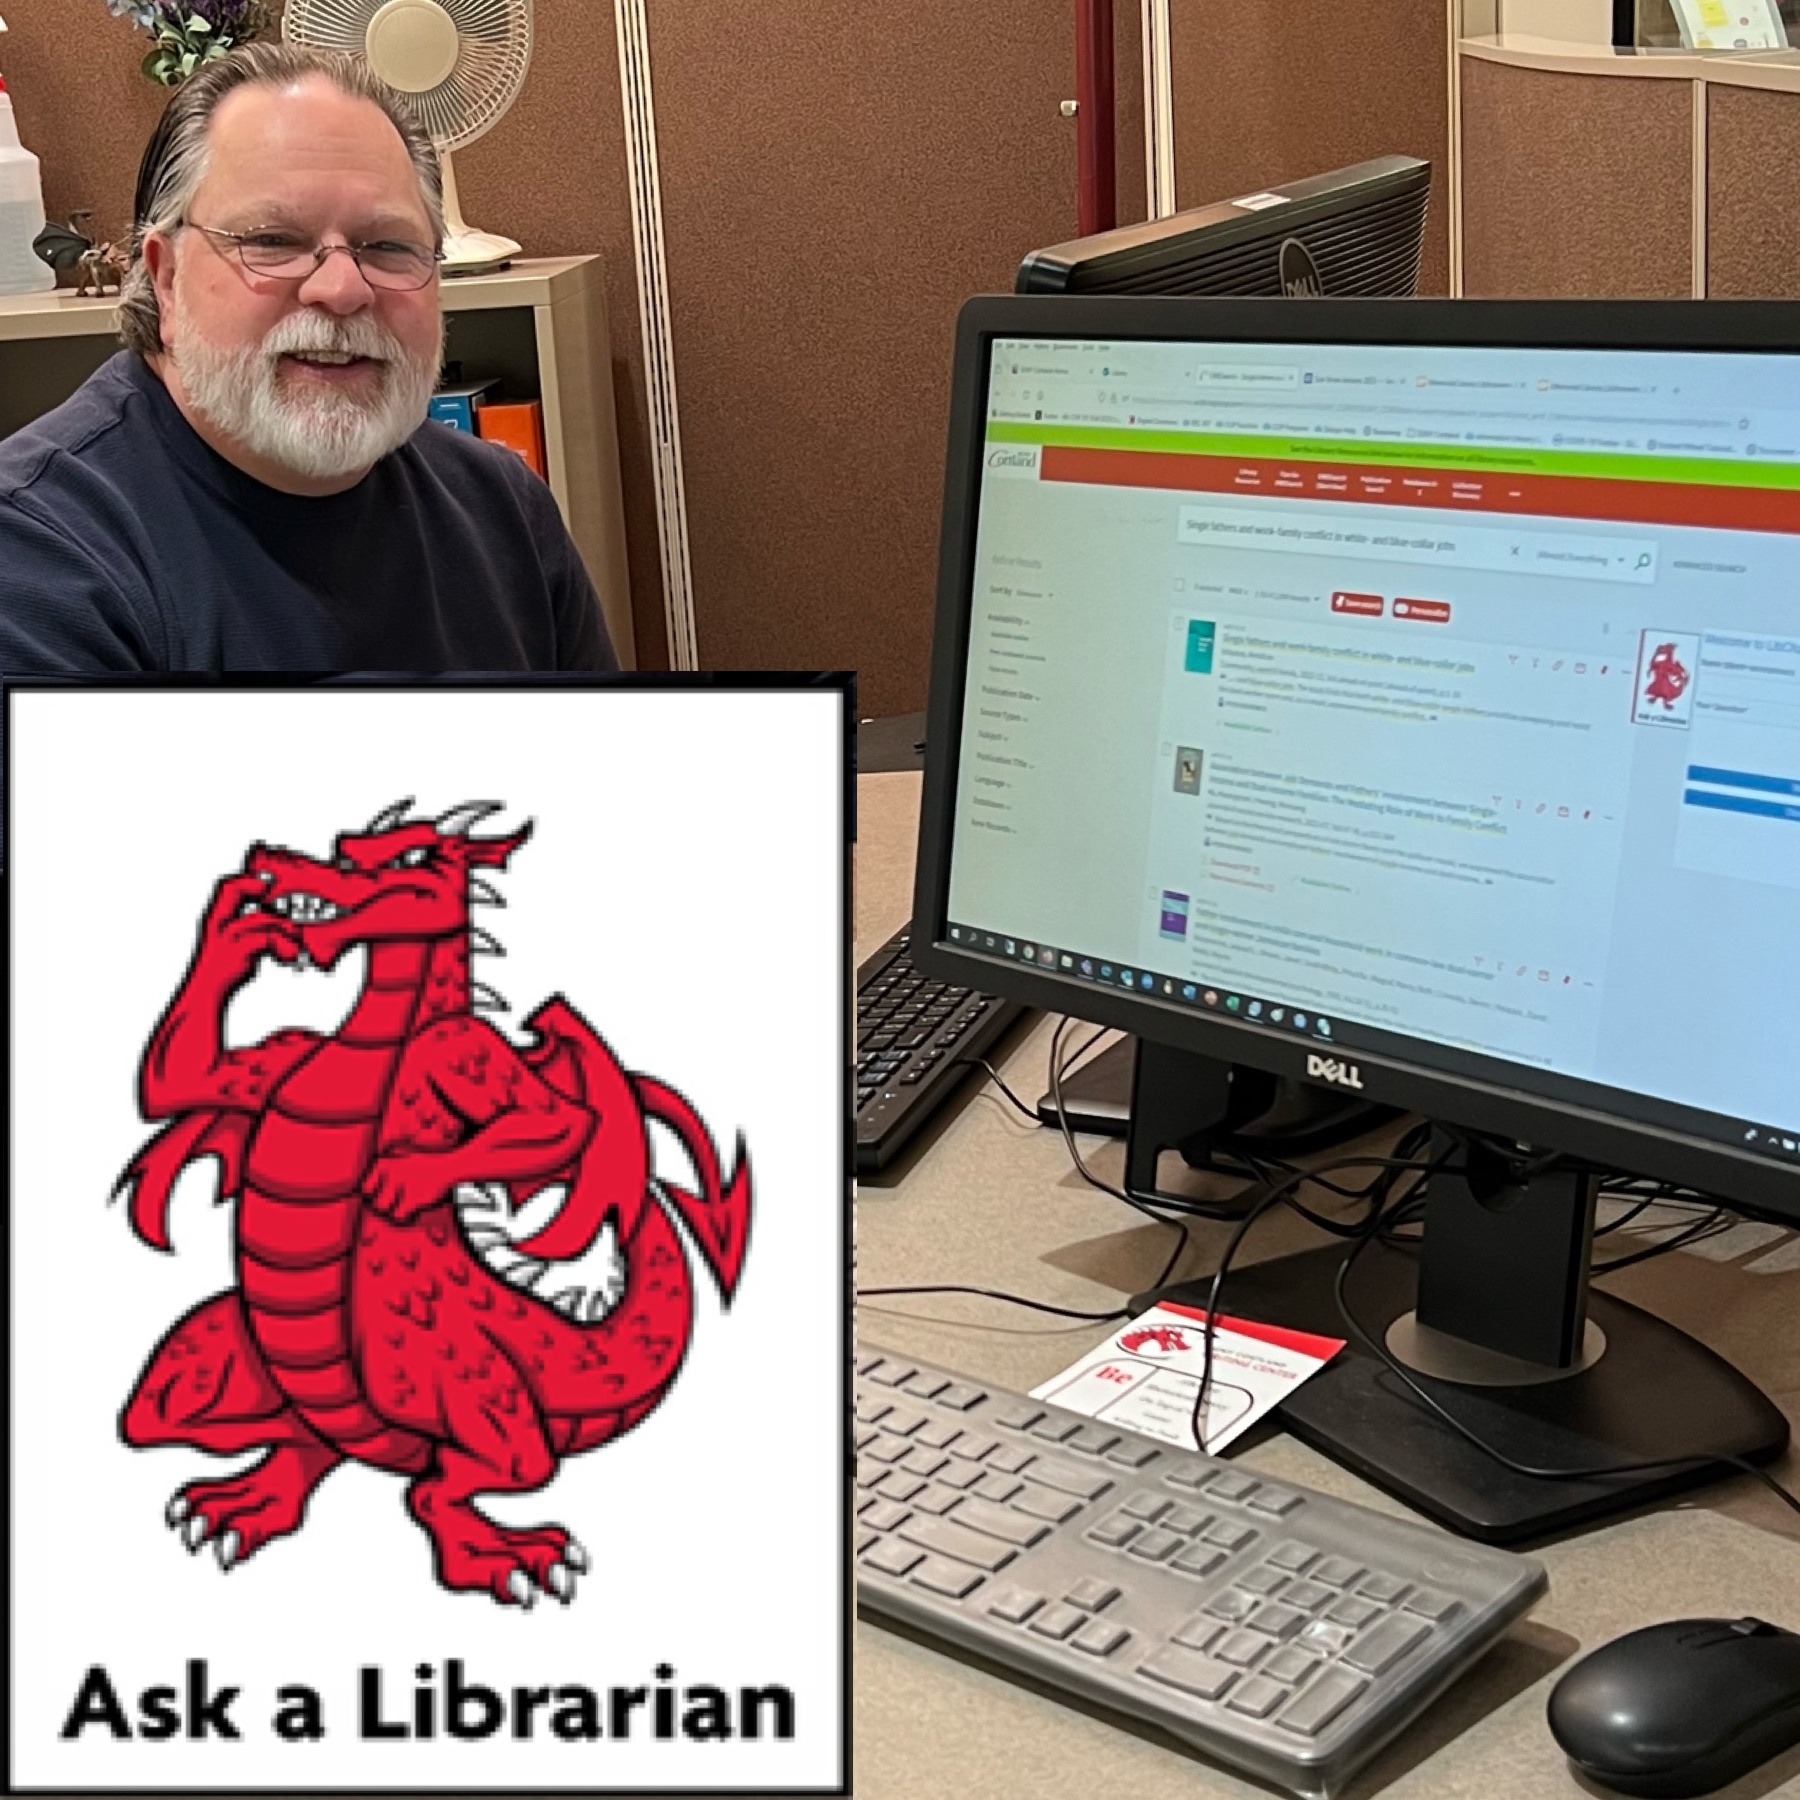 For quick questions, you can visit the Library tab of myRedDragon to chat 24/7 with a librarian, or click the Ask a Librarian dragon button (shown) in many of our databases. 